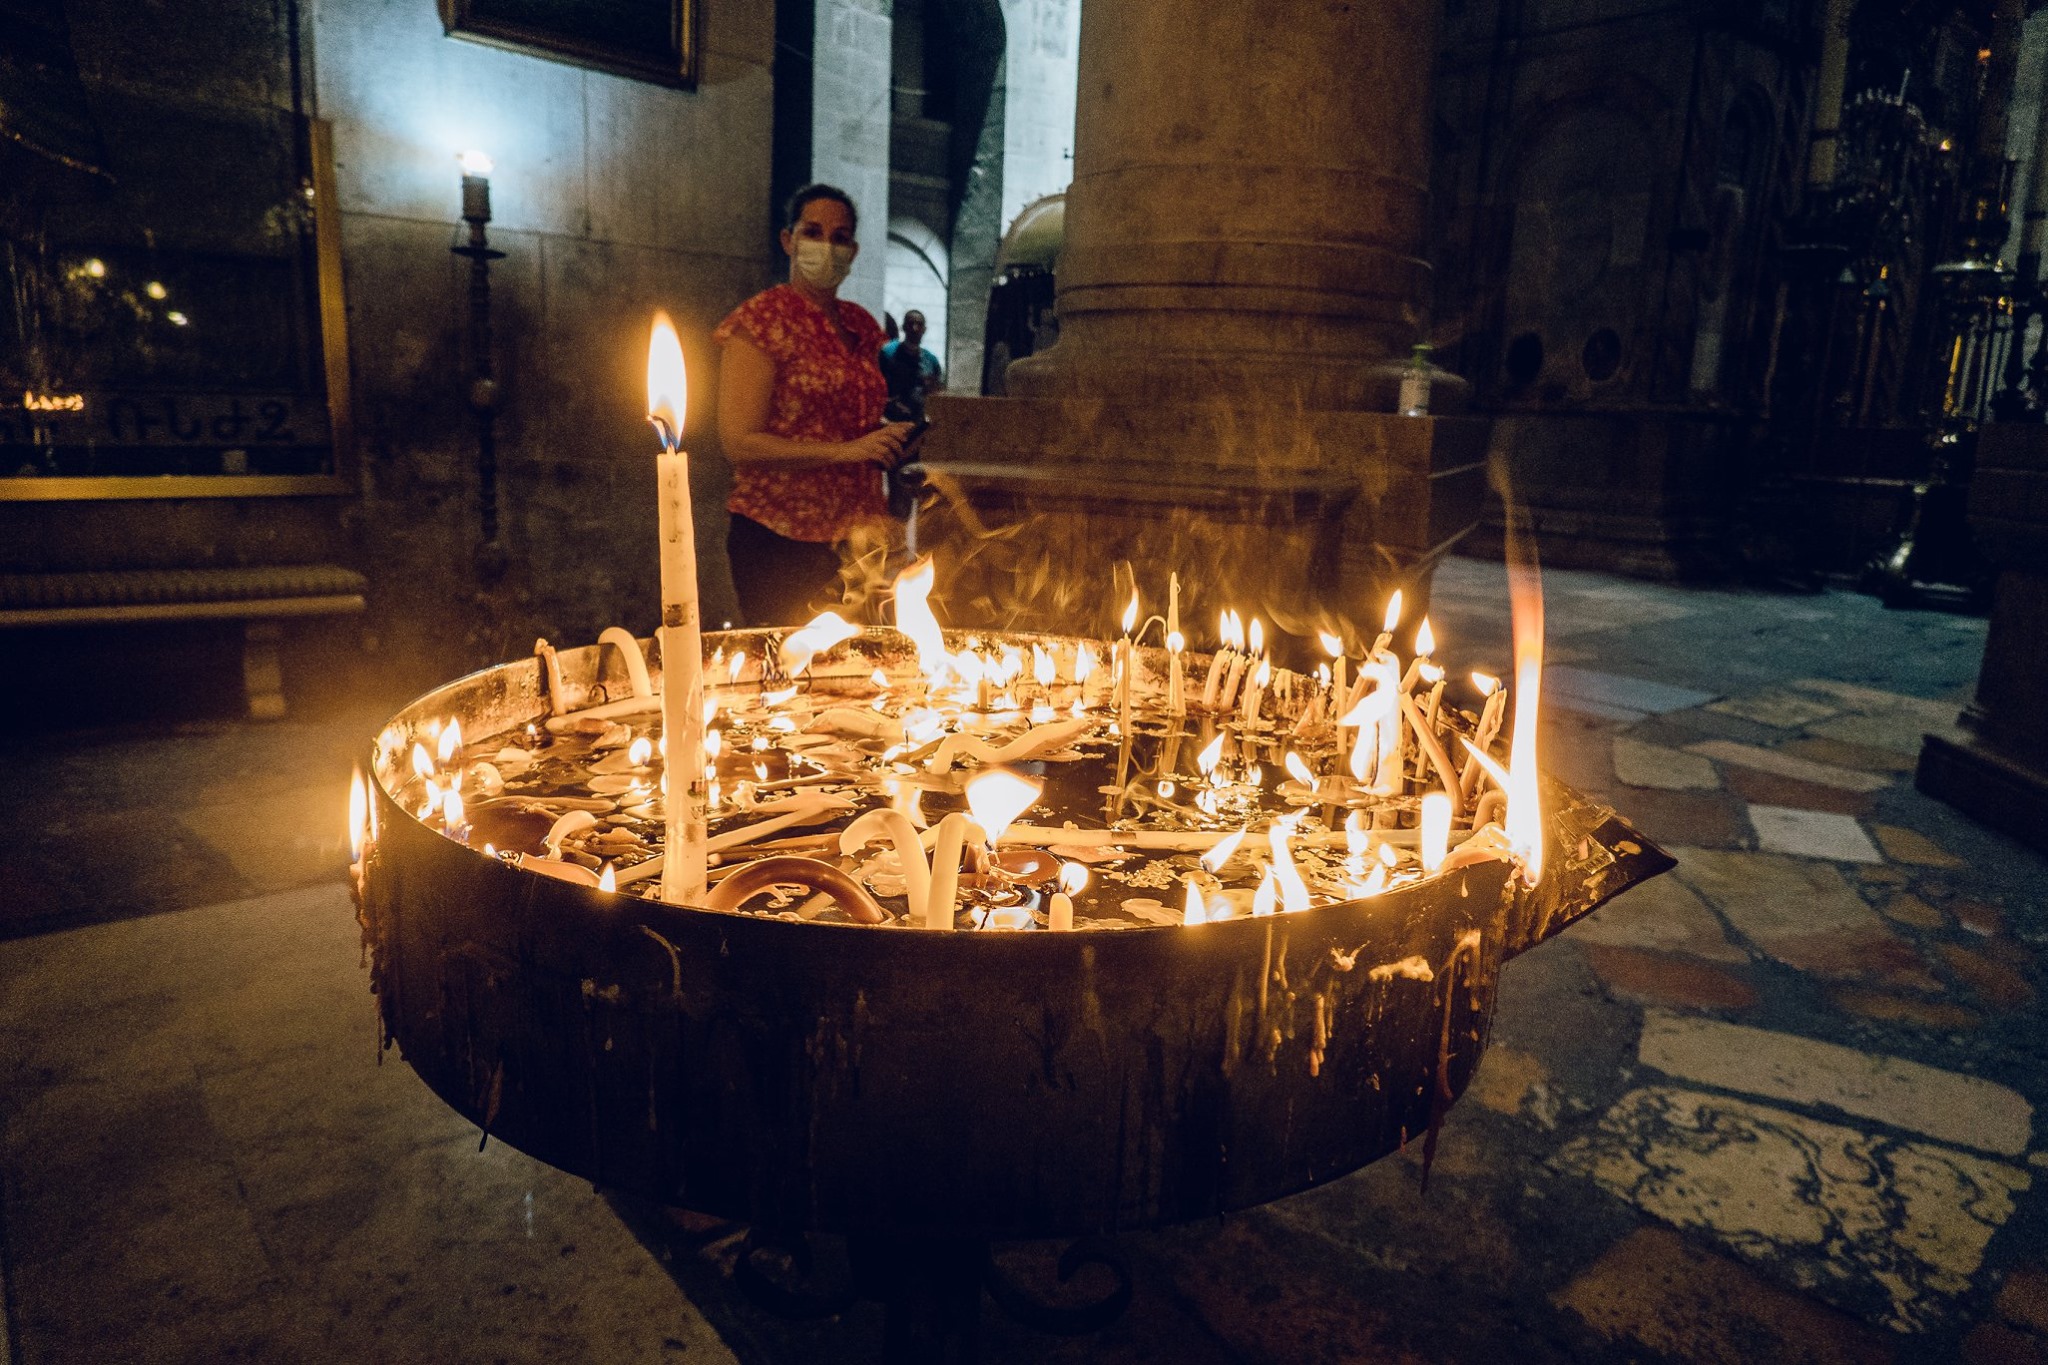 Candles lit in the Church of the Holy Sepulcher, Jerusalem